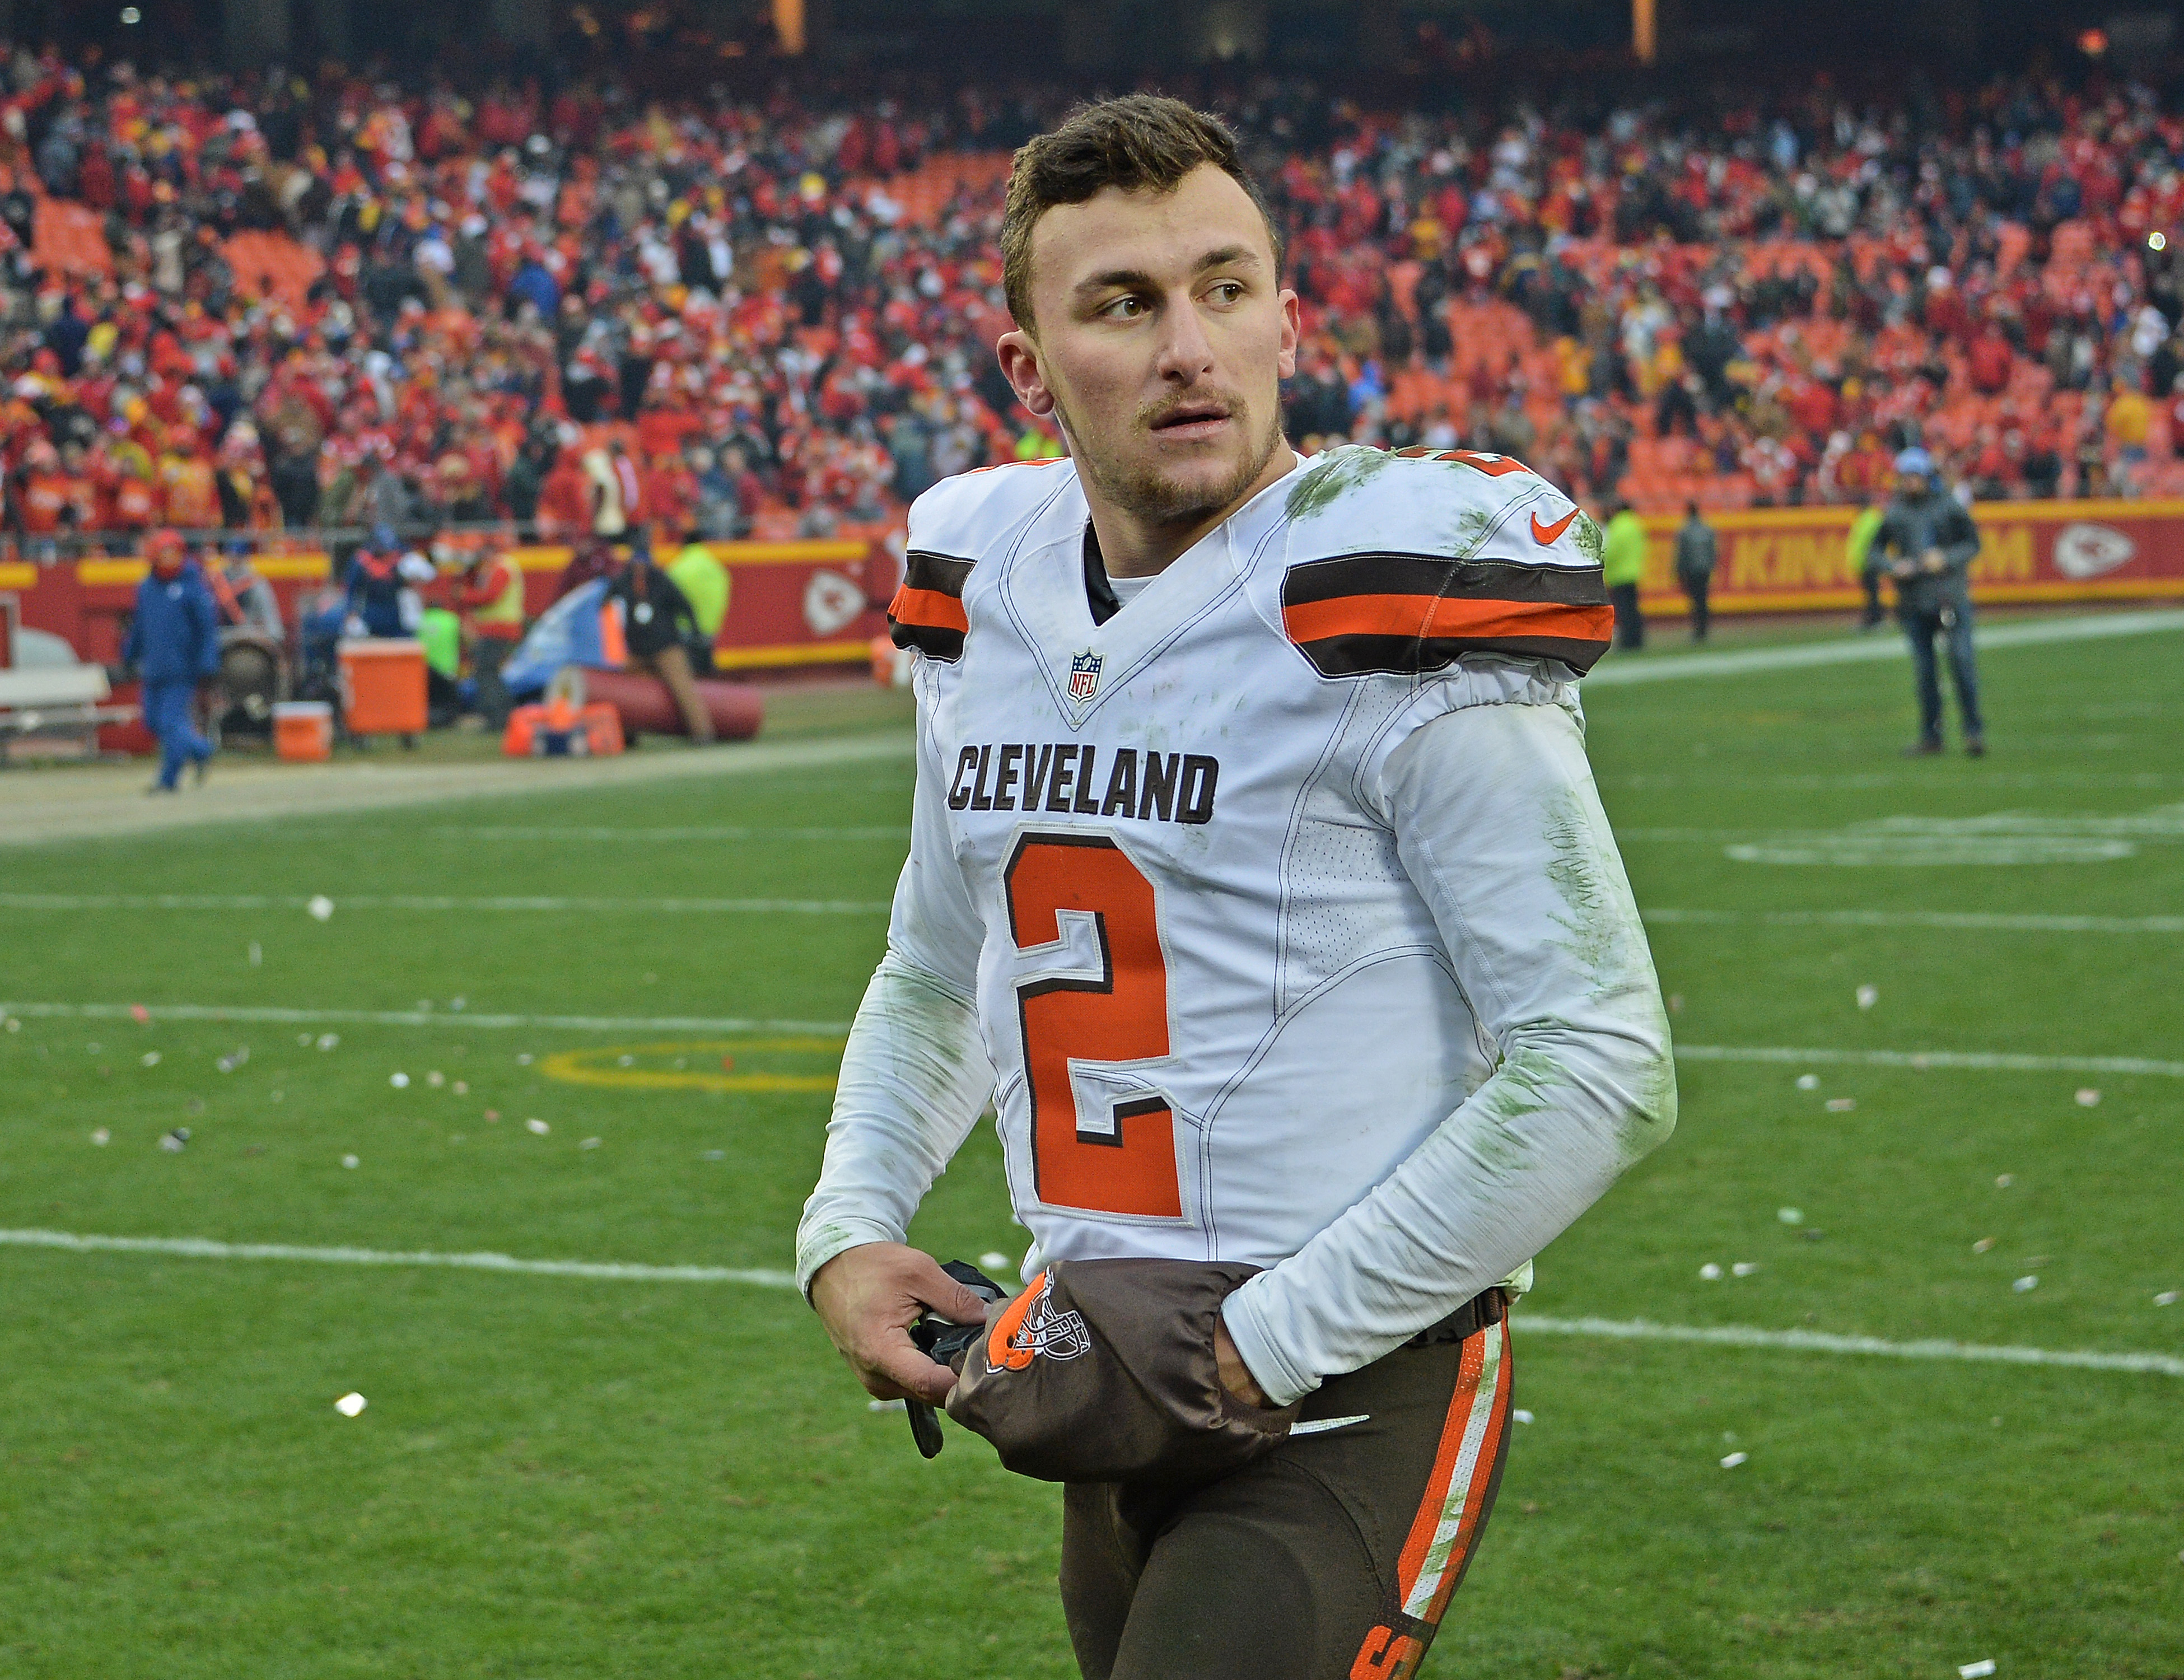 Quarterback Johnny Manziel of the Cleveland Browns walks off the field, after losing to the Kansas City Chiefs on Dec. 27, 2015, at Arrowhead Stadium in Kansas City, Mo. (Peter G. Aiken—Getty Images)